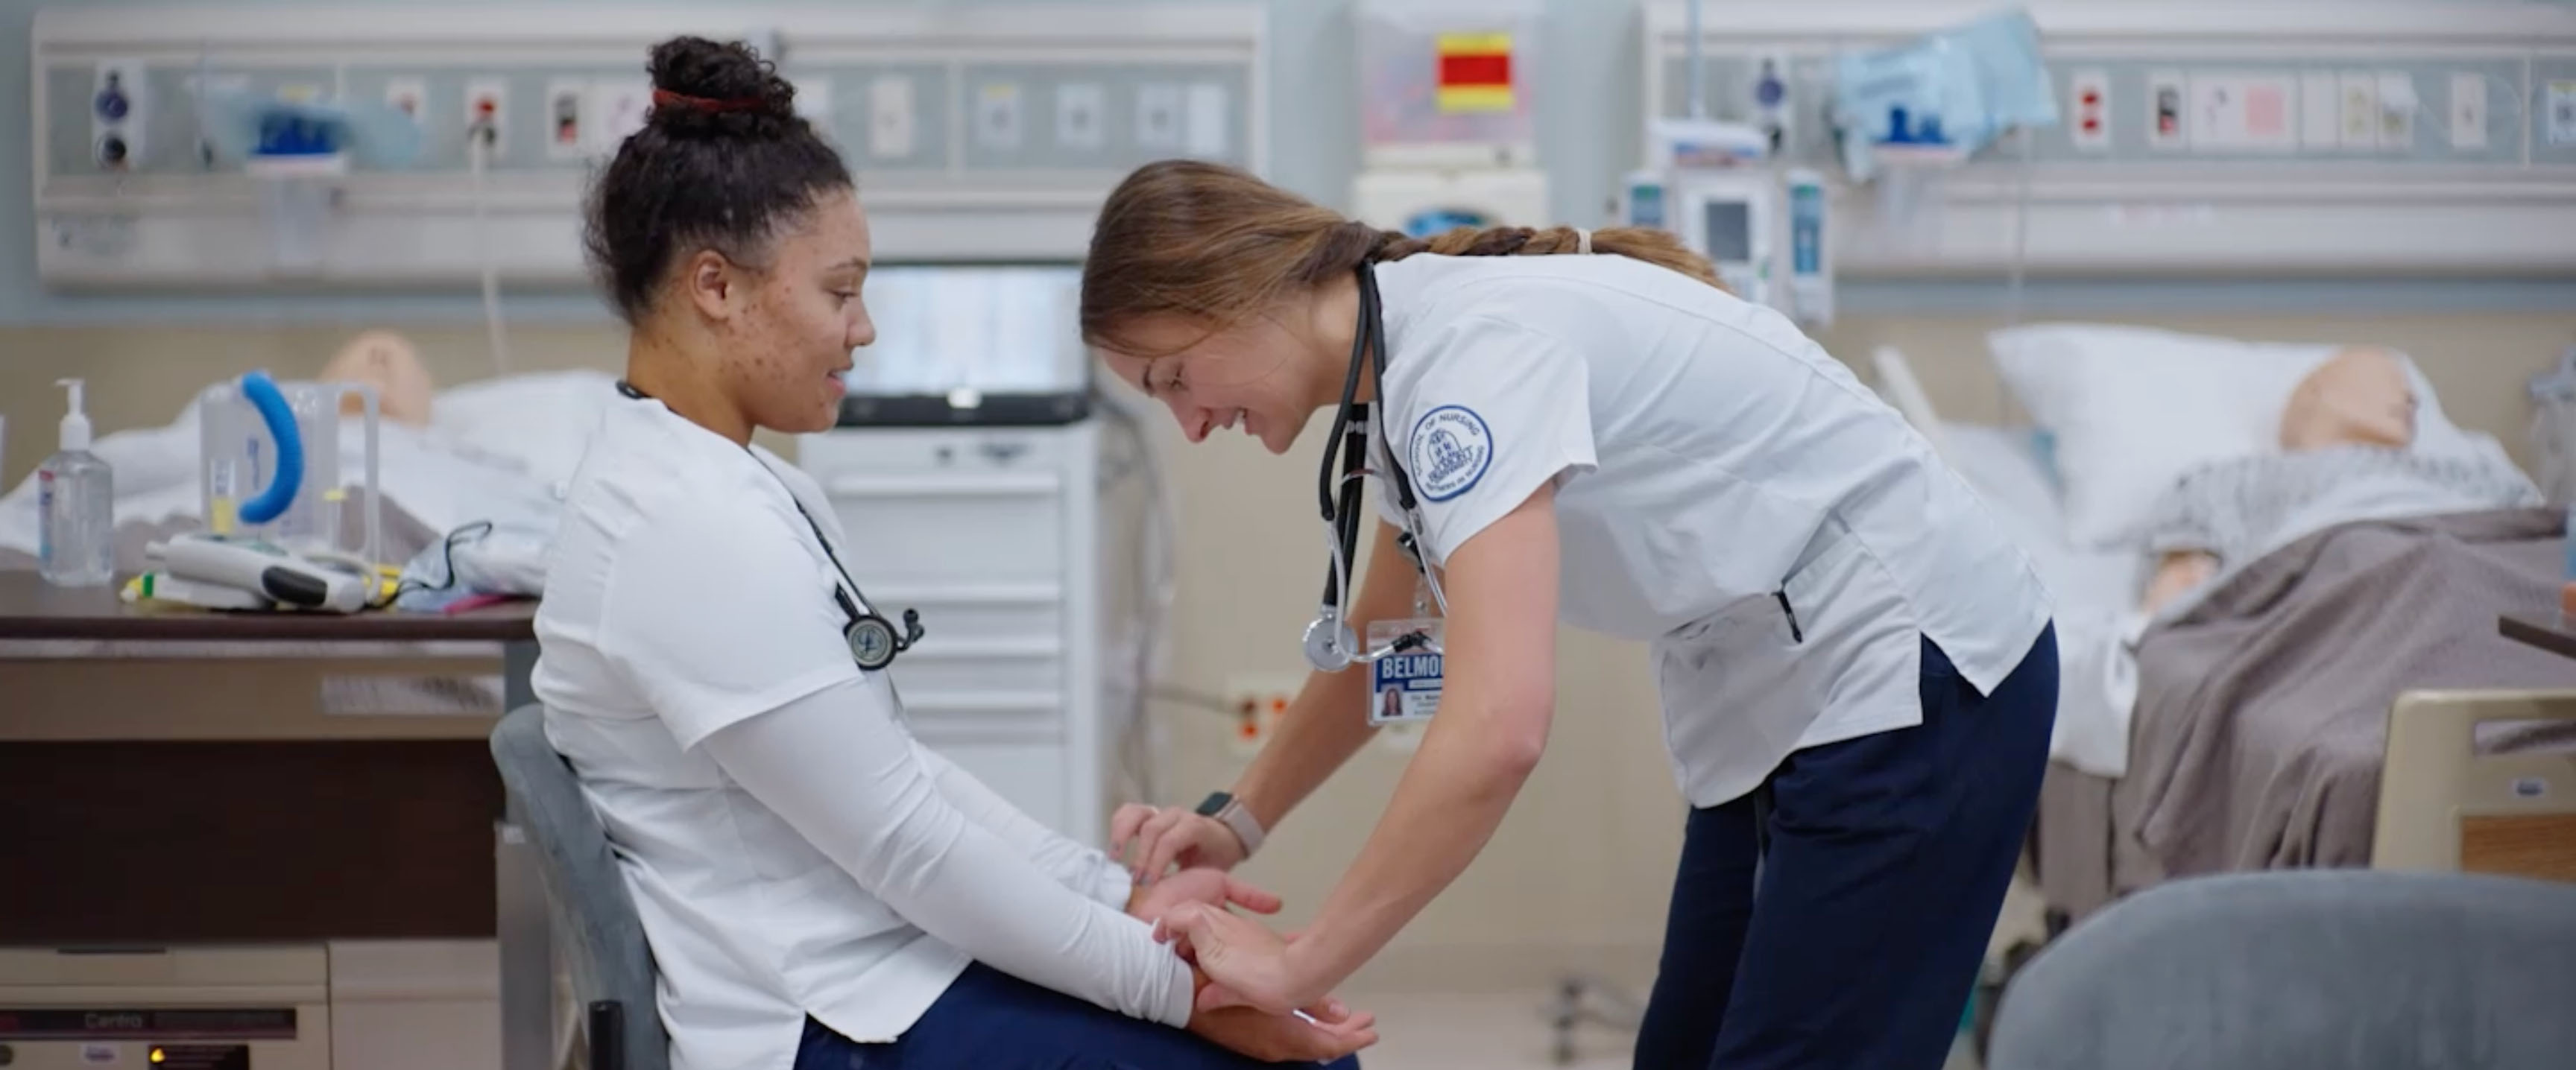 Two nursing students working together in a lab simulation